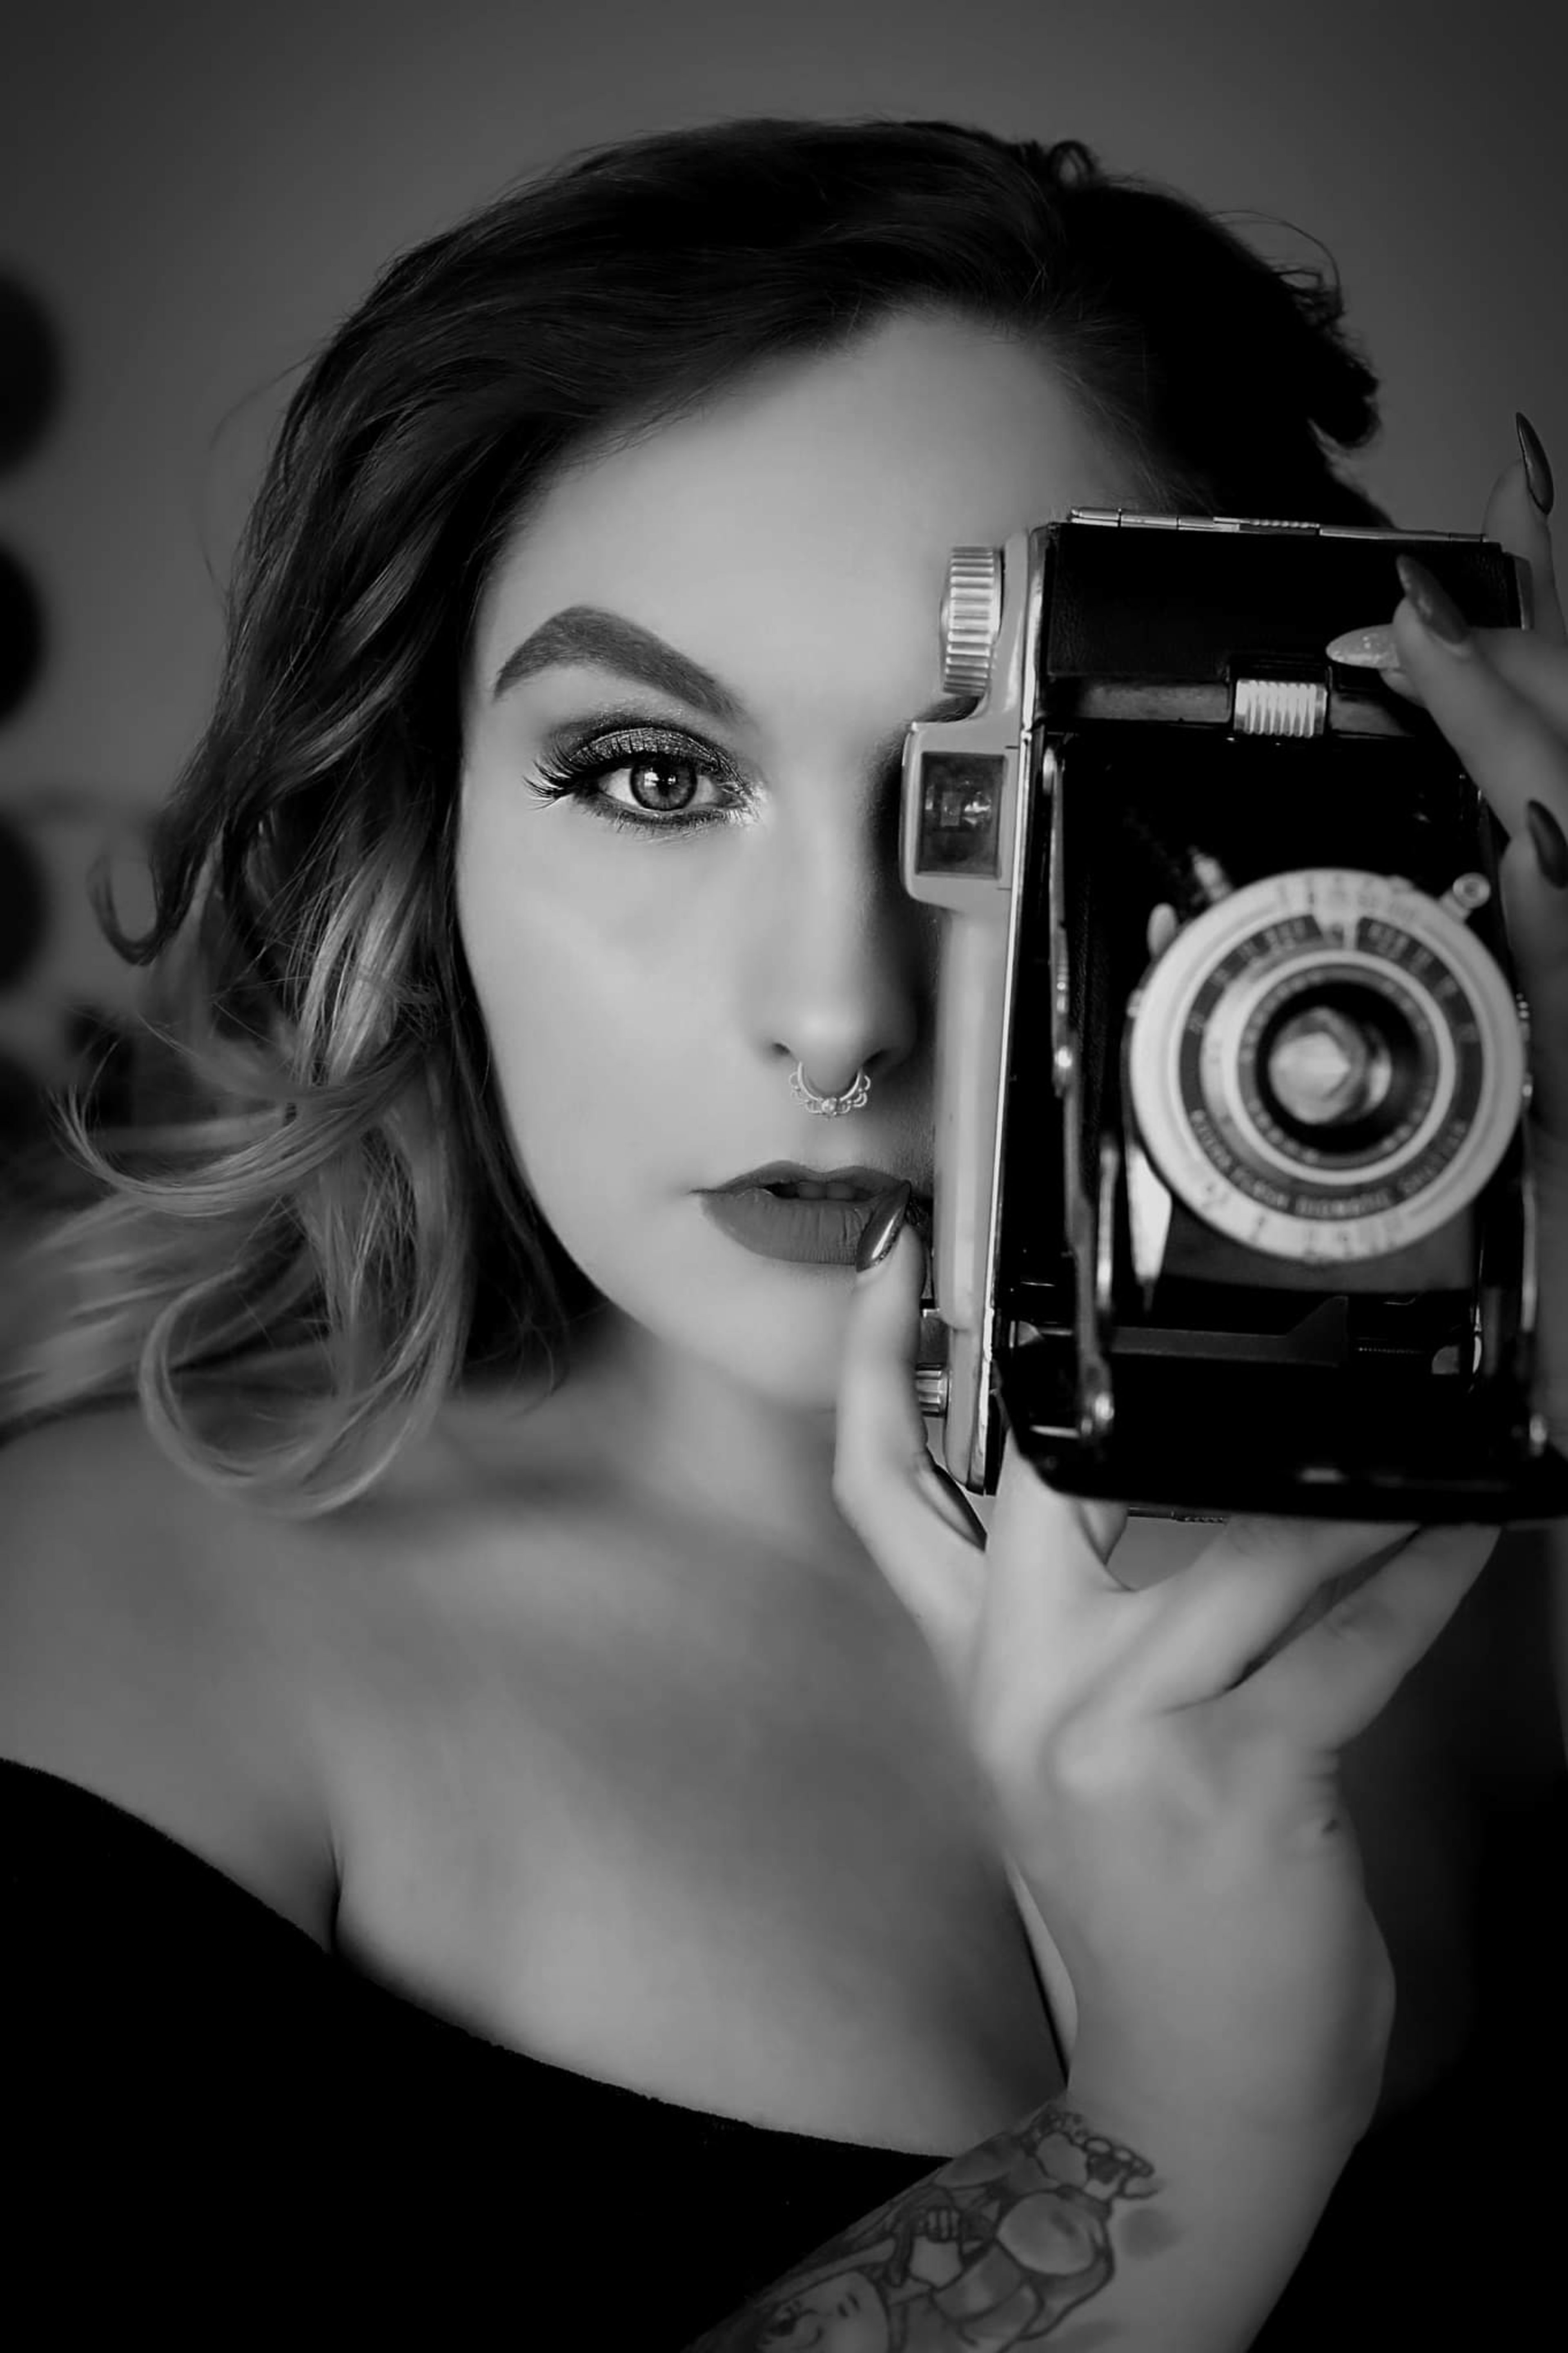 A black and white photoshoot of a woman holding a retro camera up to her face.